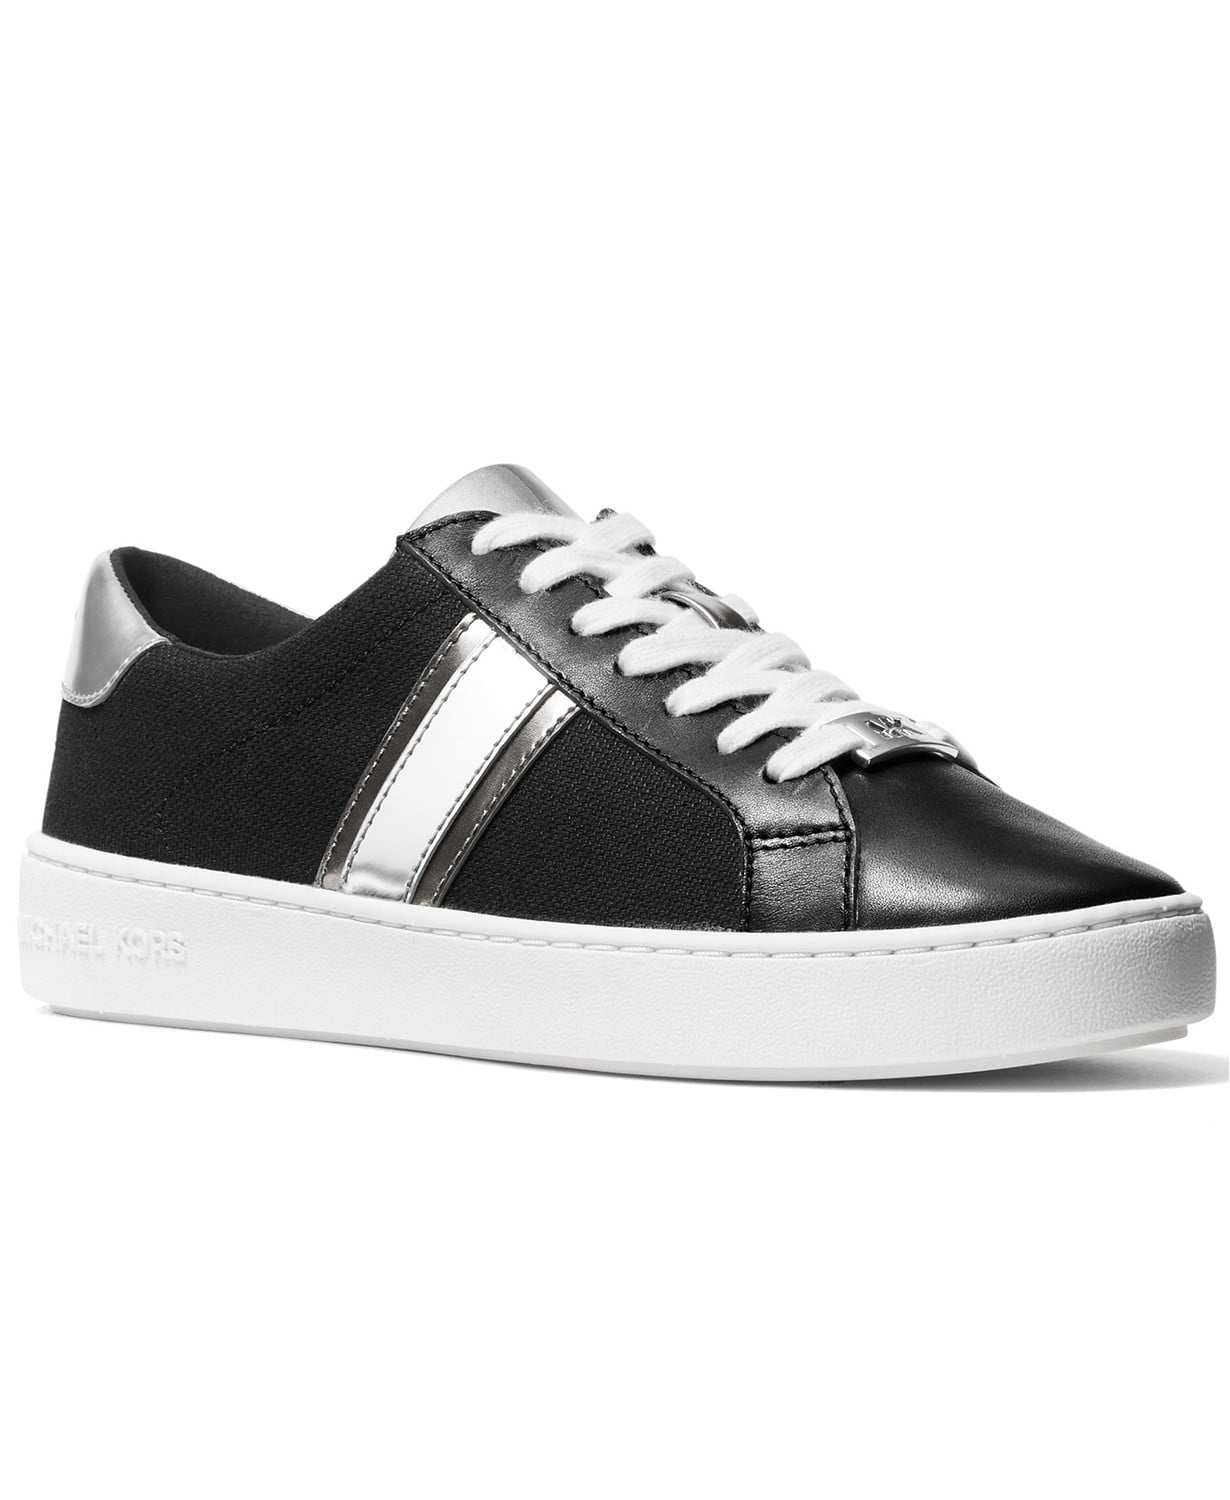 www.couturepoint.com-michael-michael-kors-black-canvas-leather-irving-side-striped-lace-up-sneakers